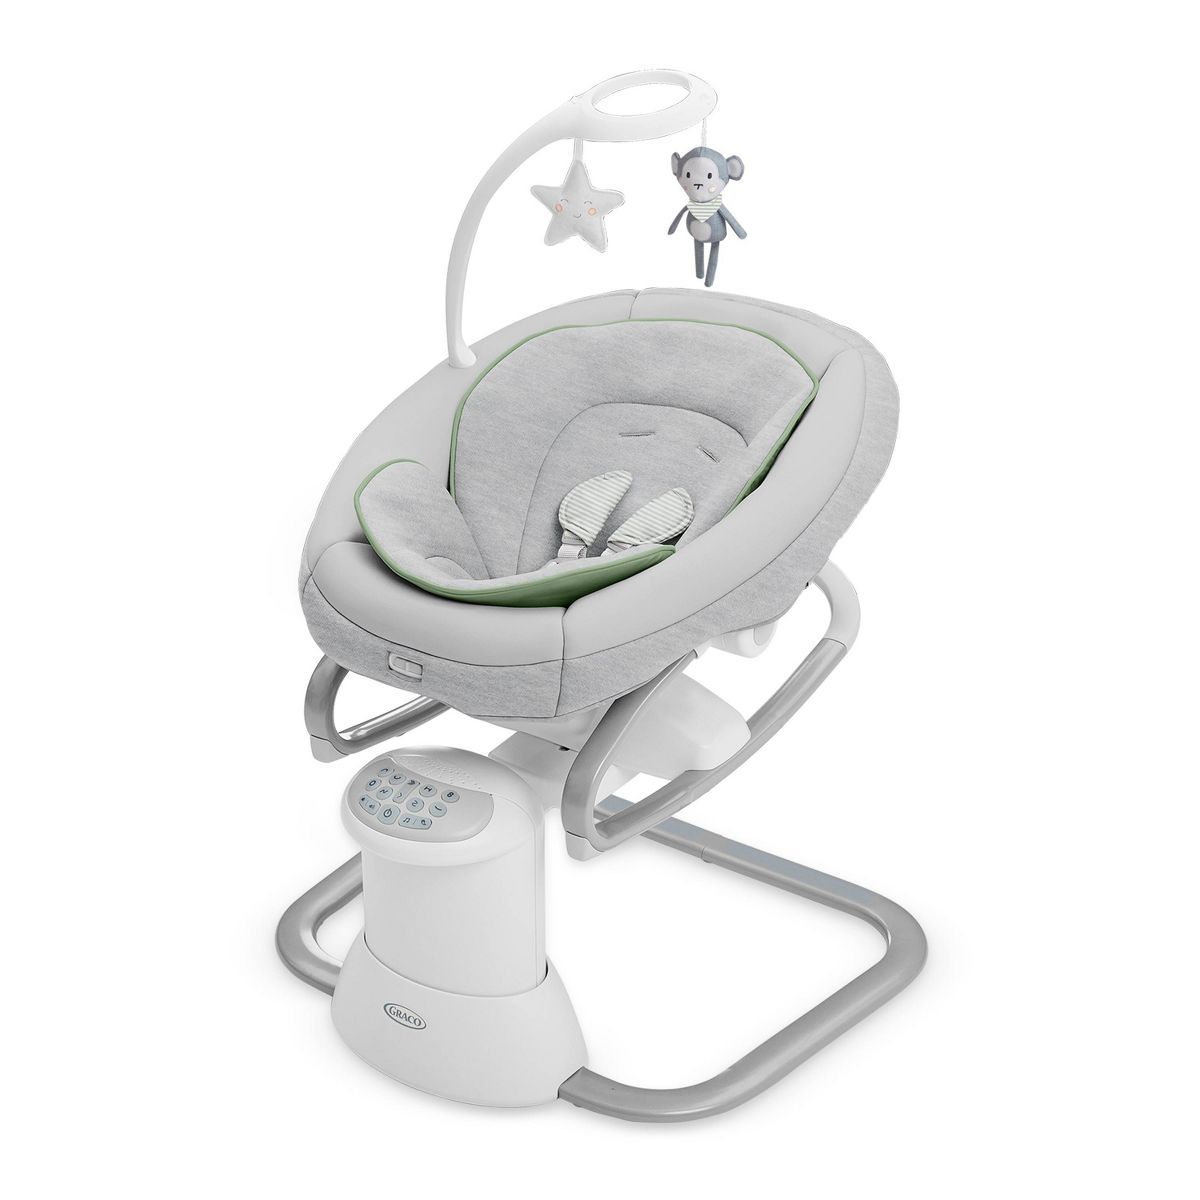 Graco Soothe My Way Baby Swing with Removable Rocker | Target